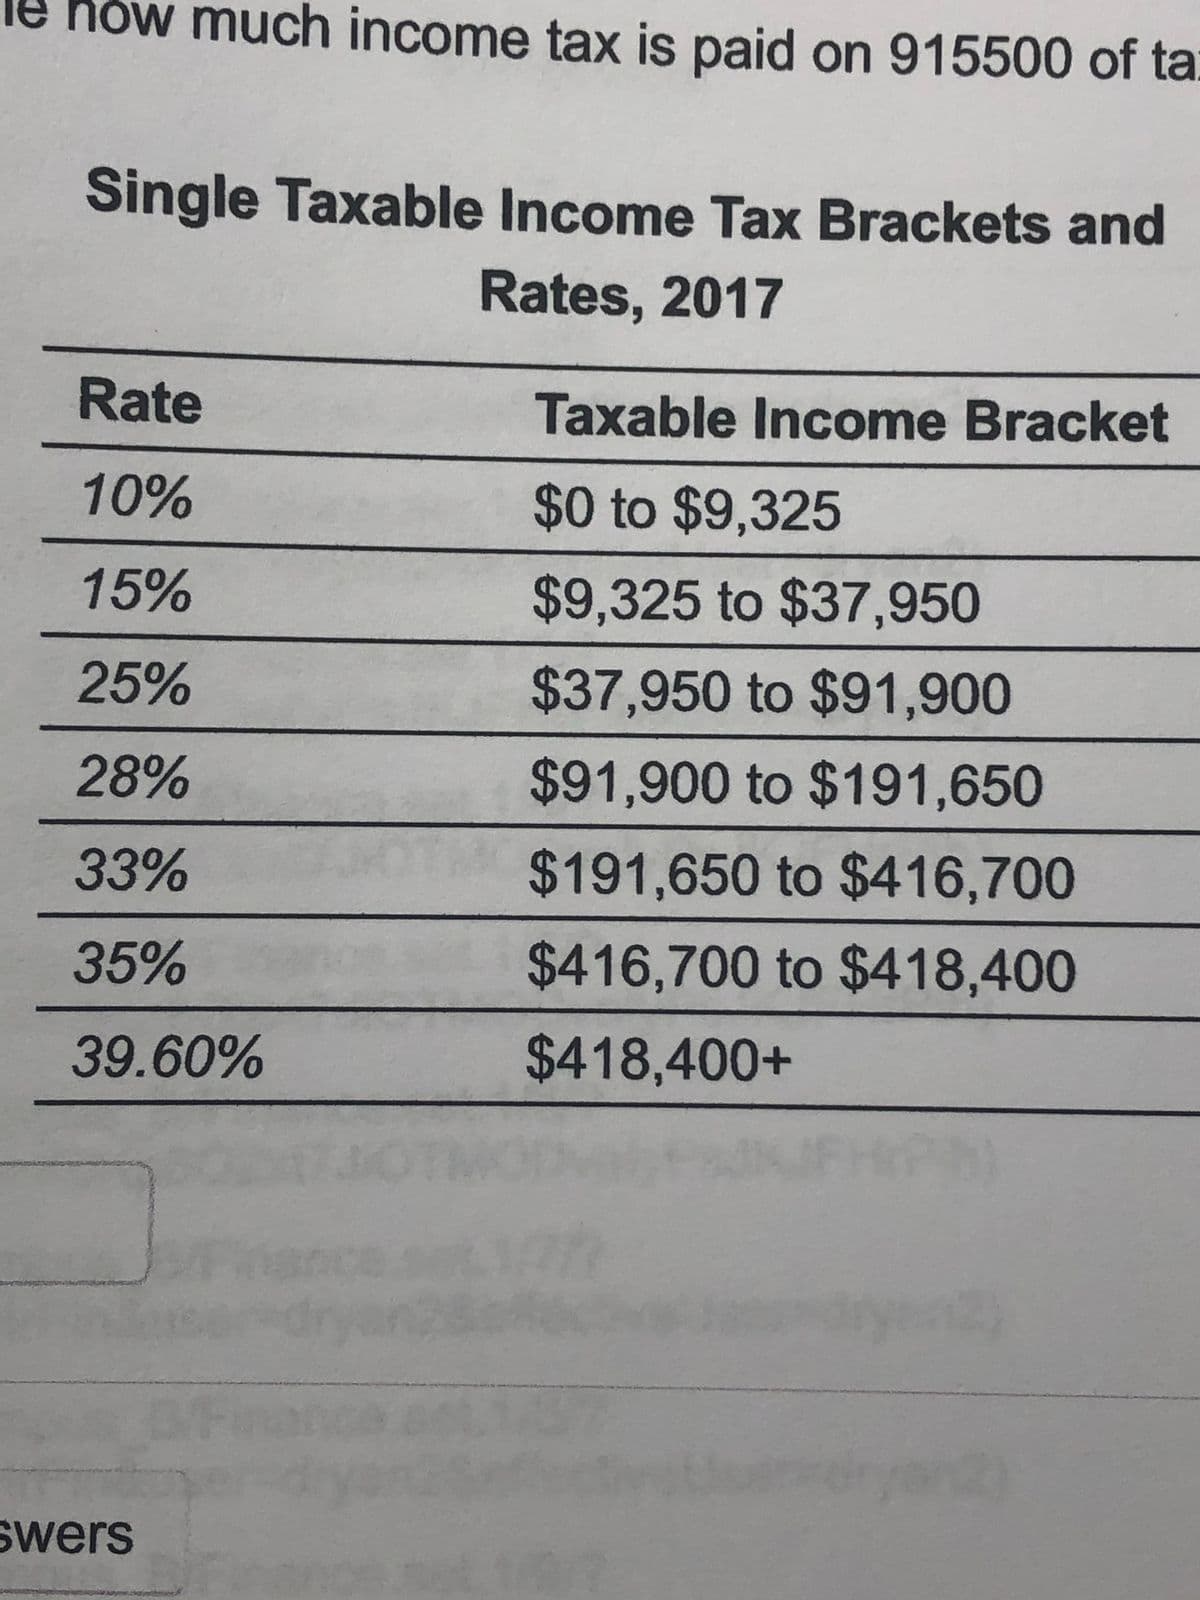 le hów much income tax is paid on 915500 of tai
Single Taxable Income Tax Brackets and
Rates, 2017
Rate
Taxable Income Bracket
10%
$0 to $9,325
15%
$9,325 to $37,950
25%
$37,950 to $91,900
28%
$91,900 to $191,650
33%
$191,650 to $416,700
35%
$416,700 to $418,400
39.60%
$418,400+
swers
